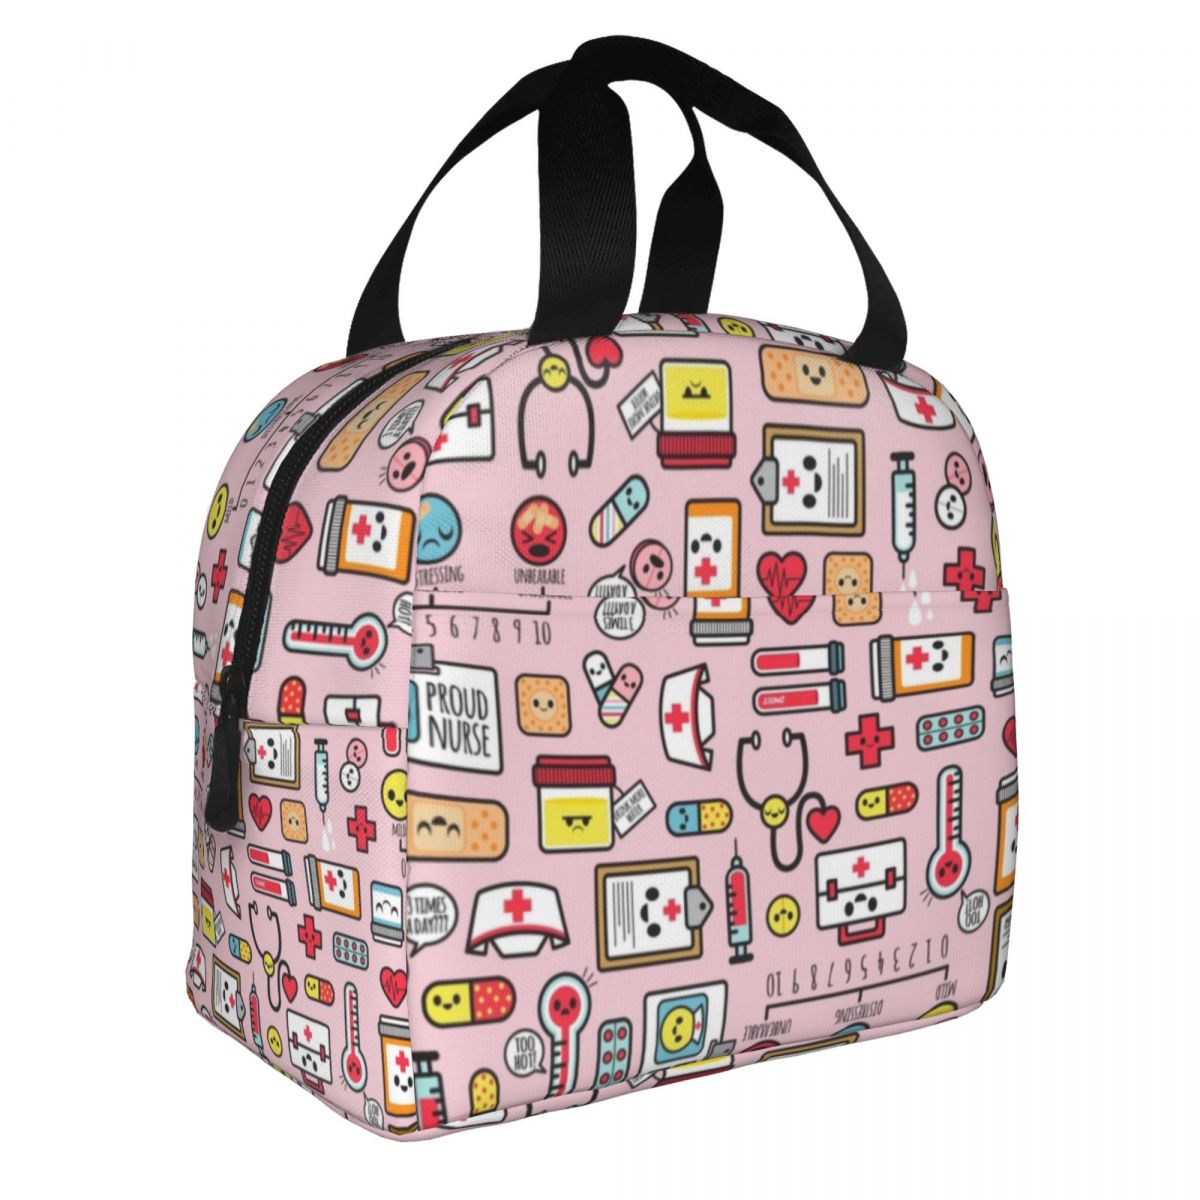 Nurse Print Insulated Portable Lunch Tote Bag  Large Capacity Nurse Picnic Bag Insulated Lunch Bag Women Nurse Print Food Case Portable School Bento Fruits Fresh Storage Pouch